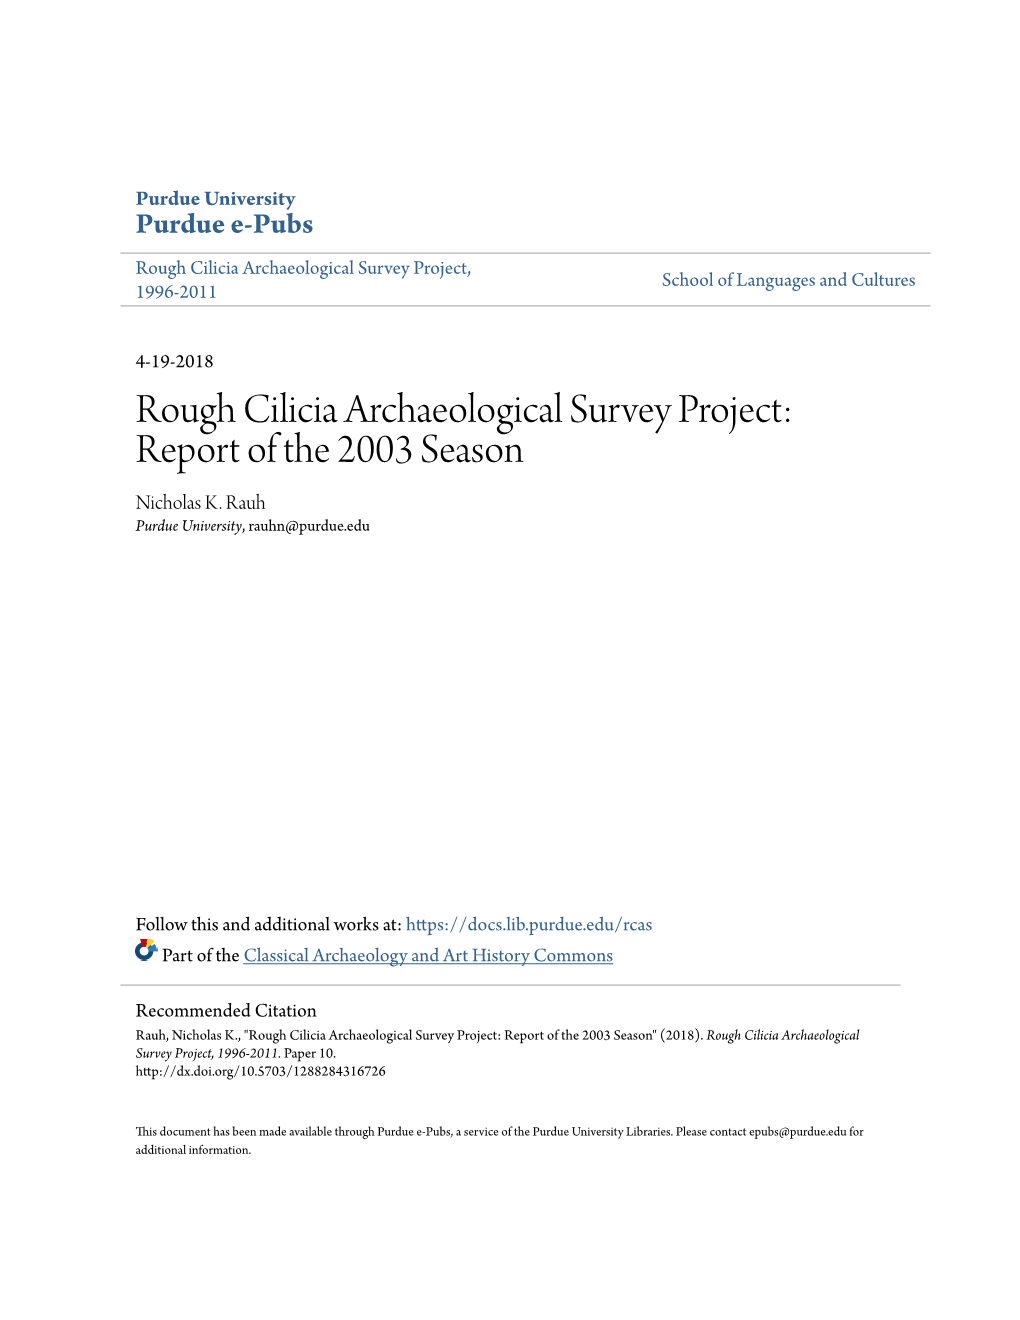 Rough Cilicia Archaeological Survey Project: Report of the 2003 Season Nicholas K